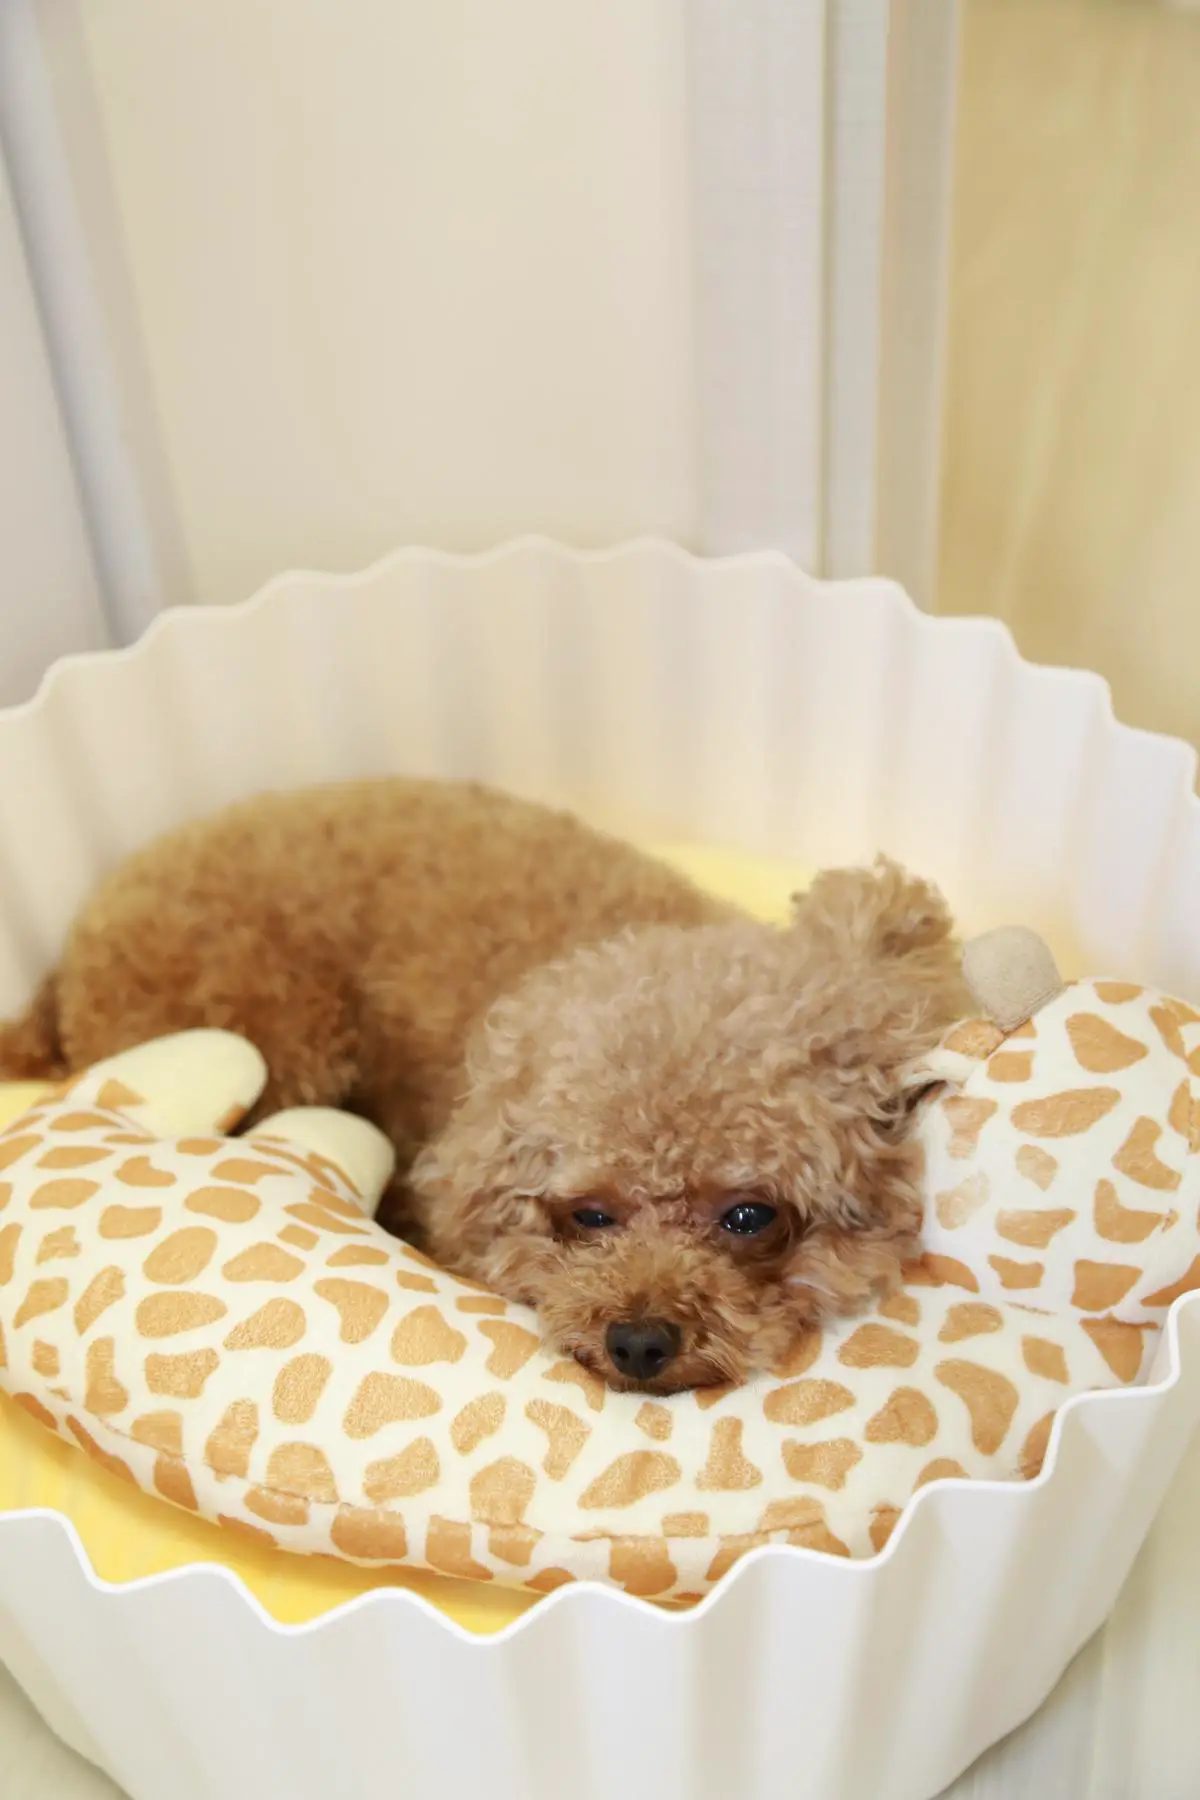 A photo of a teacup poodle with a different color on each side, demonstrating the phenomenon of color changes in teacup poodles.